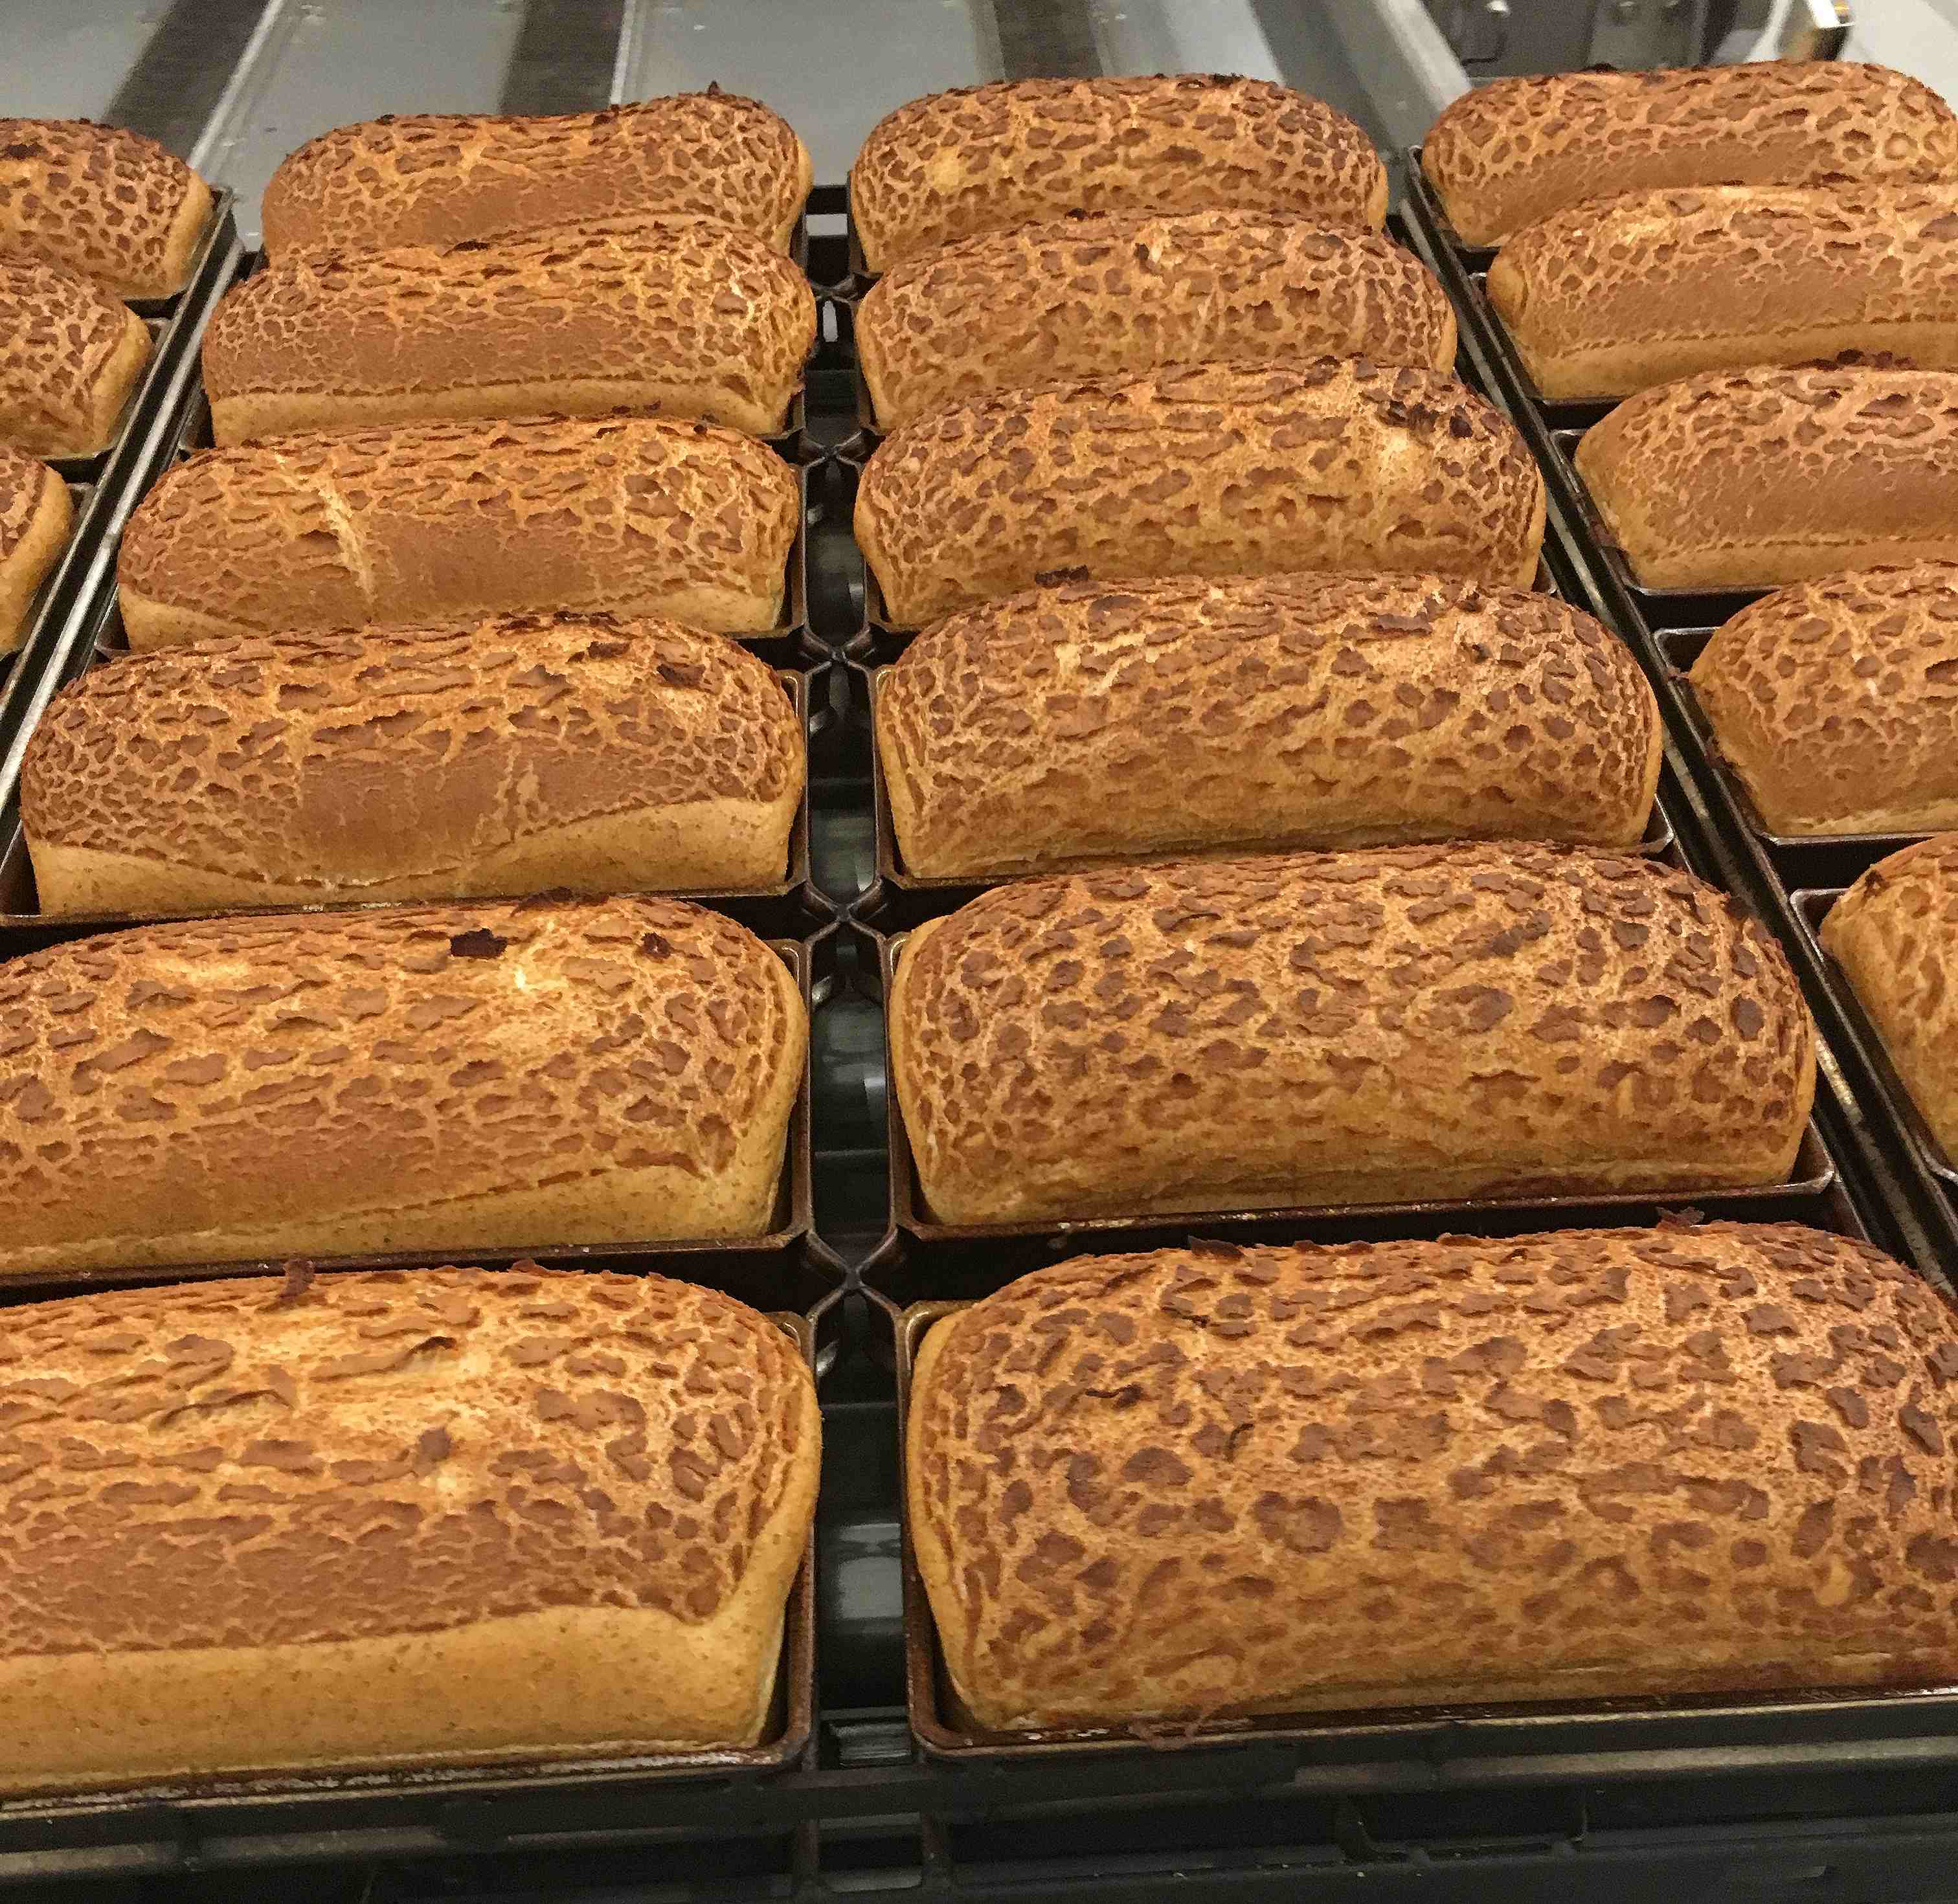 Tiger bread in tins after baking